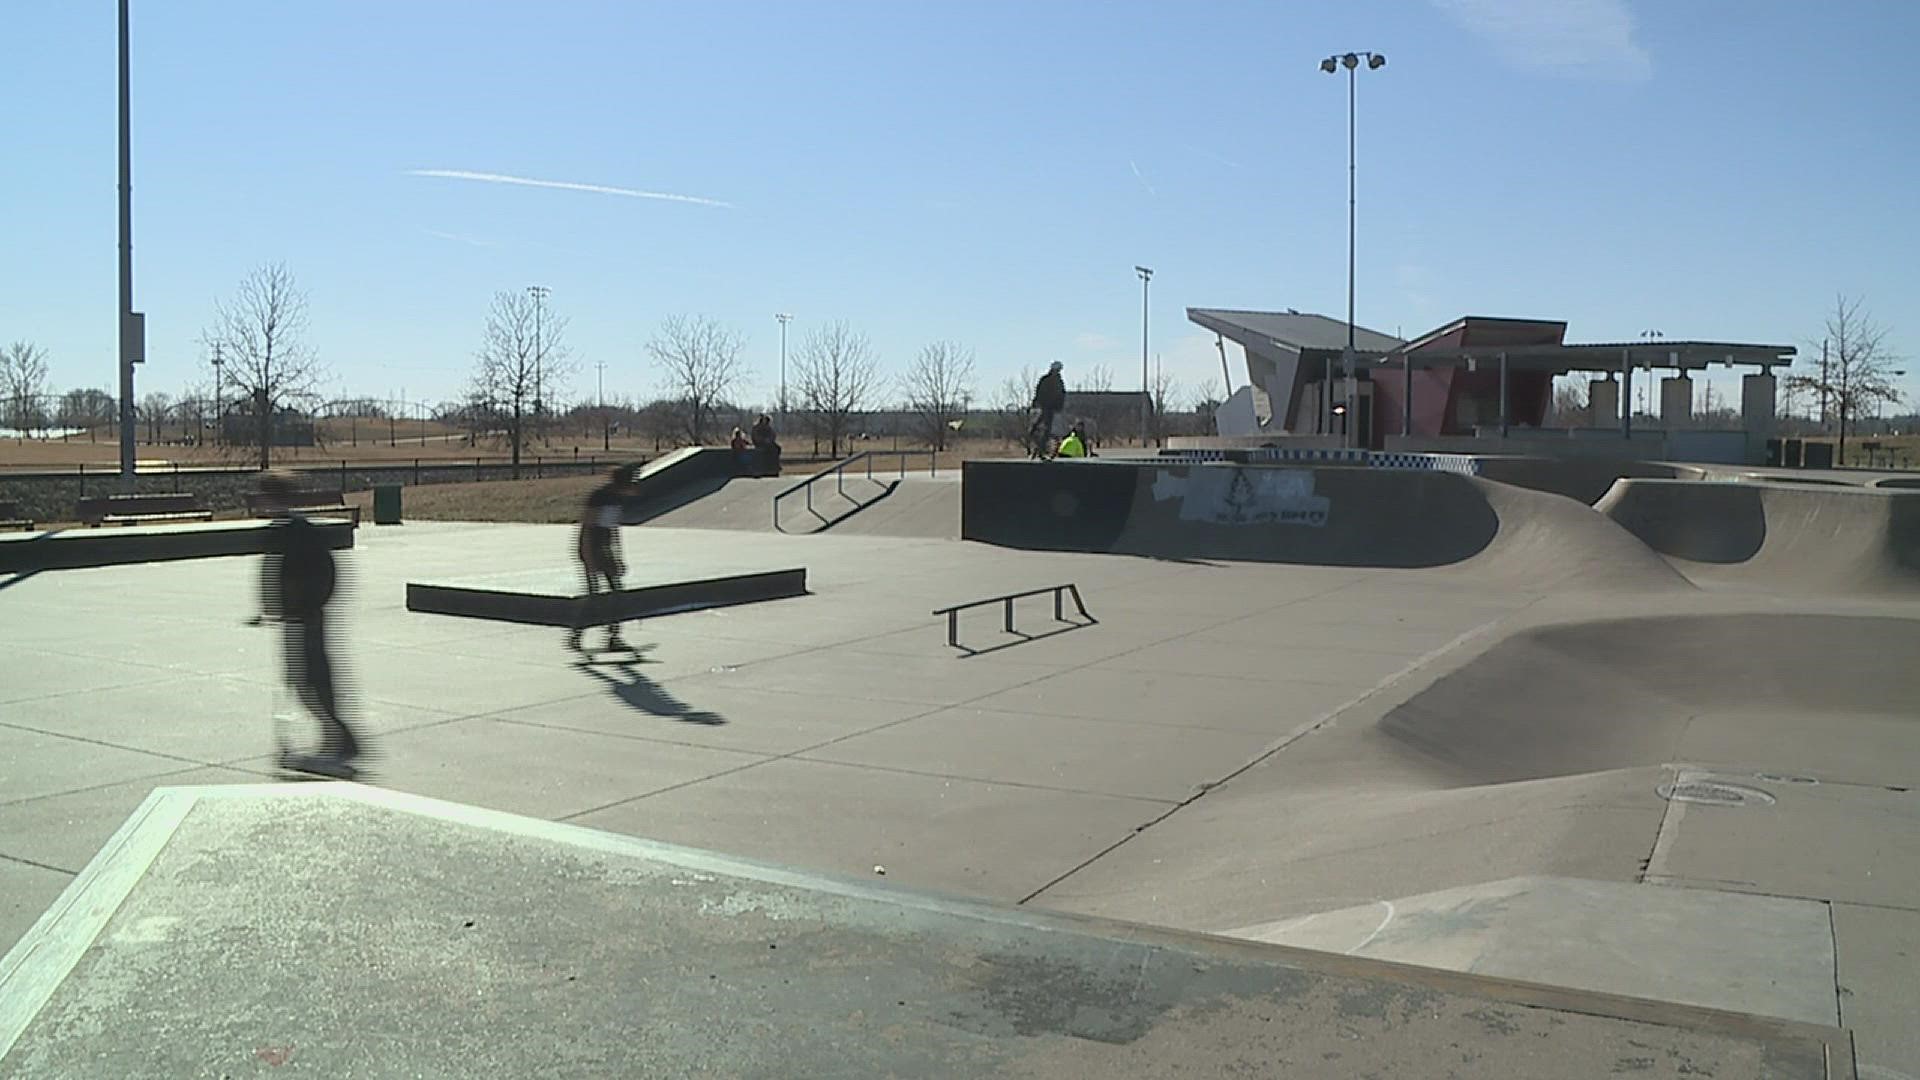 Renew Moline is asking for design input on a new skatepark for downtown Moline, located partially under the new I-74 bridge.